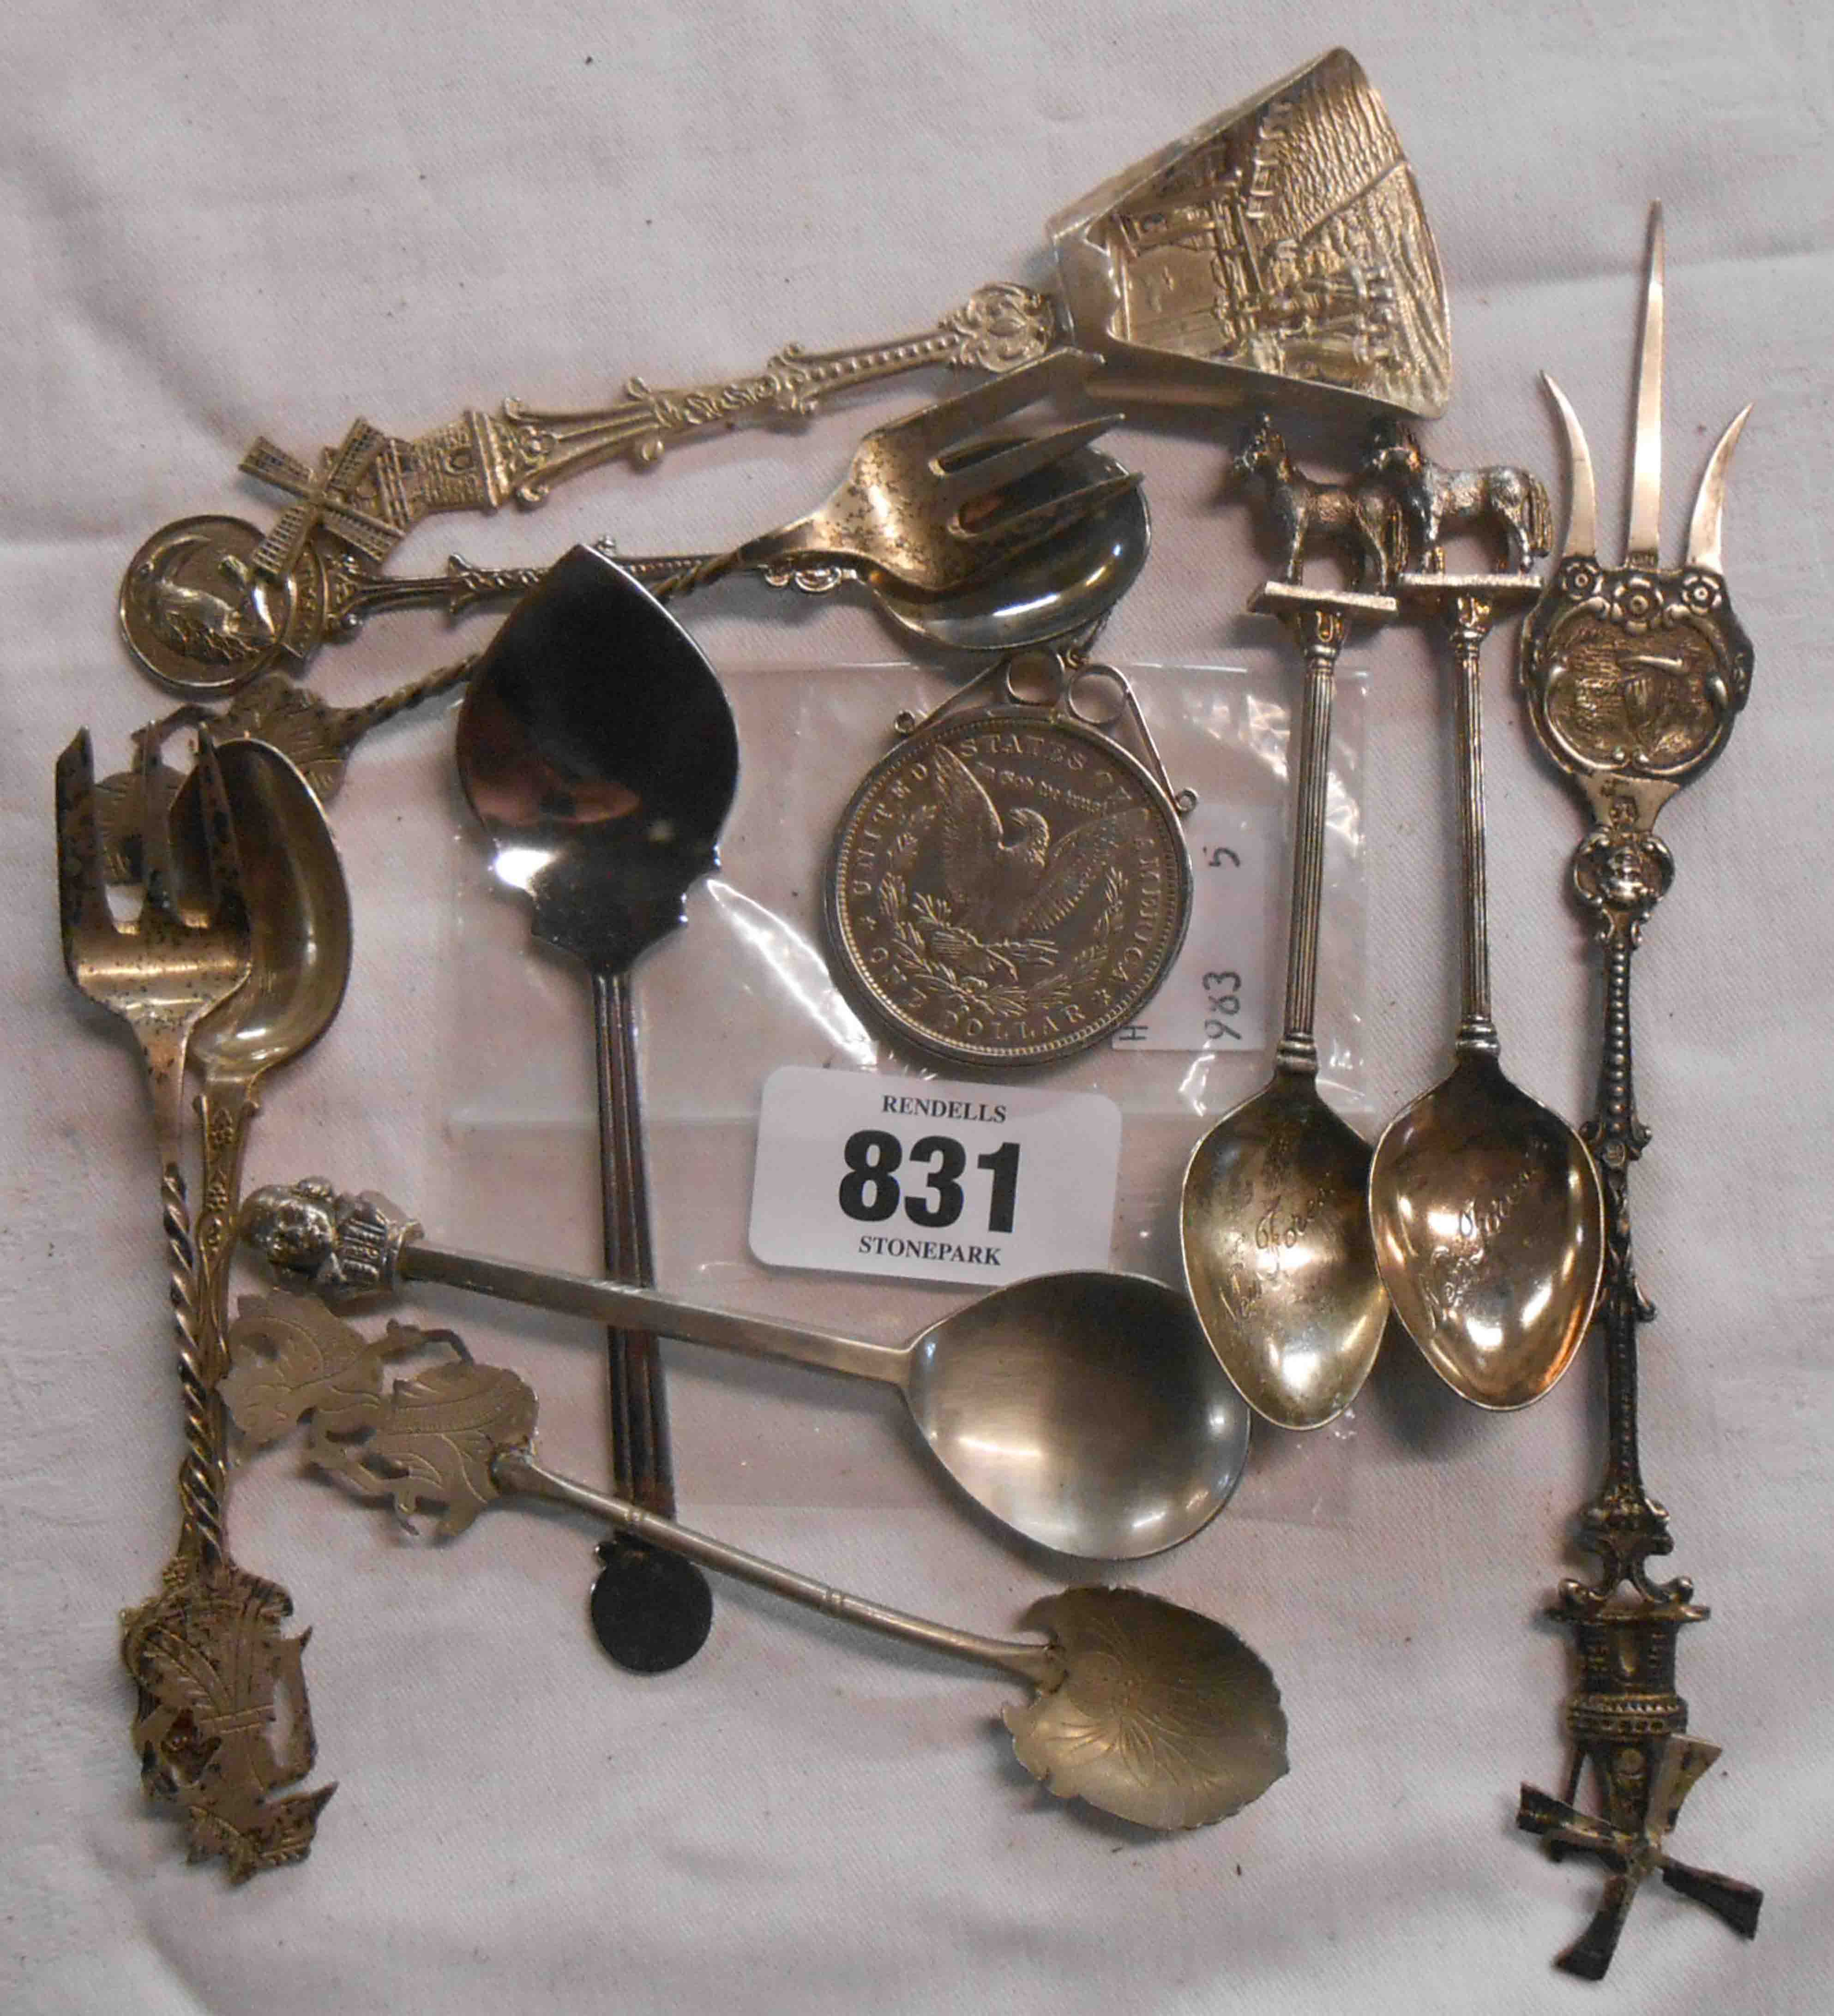 A silver dollar and a quantity of souvenir spoons